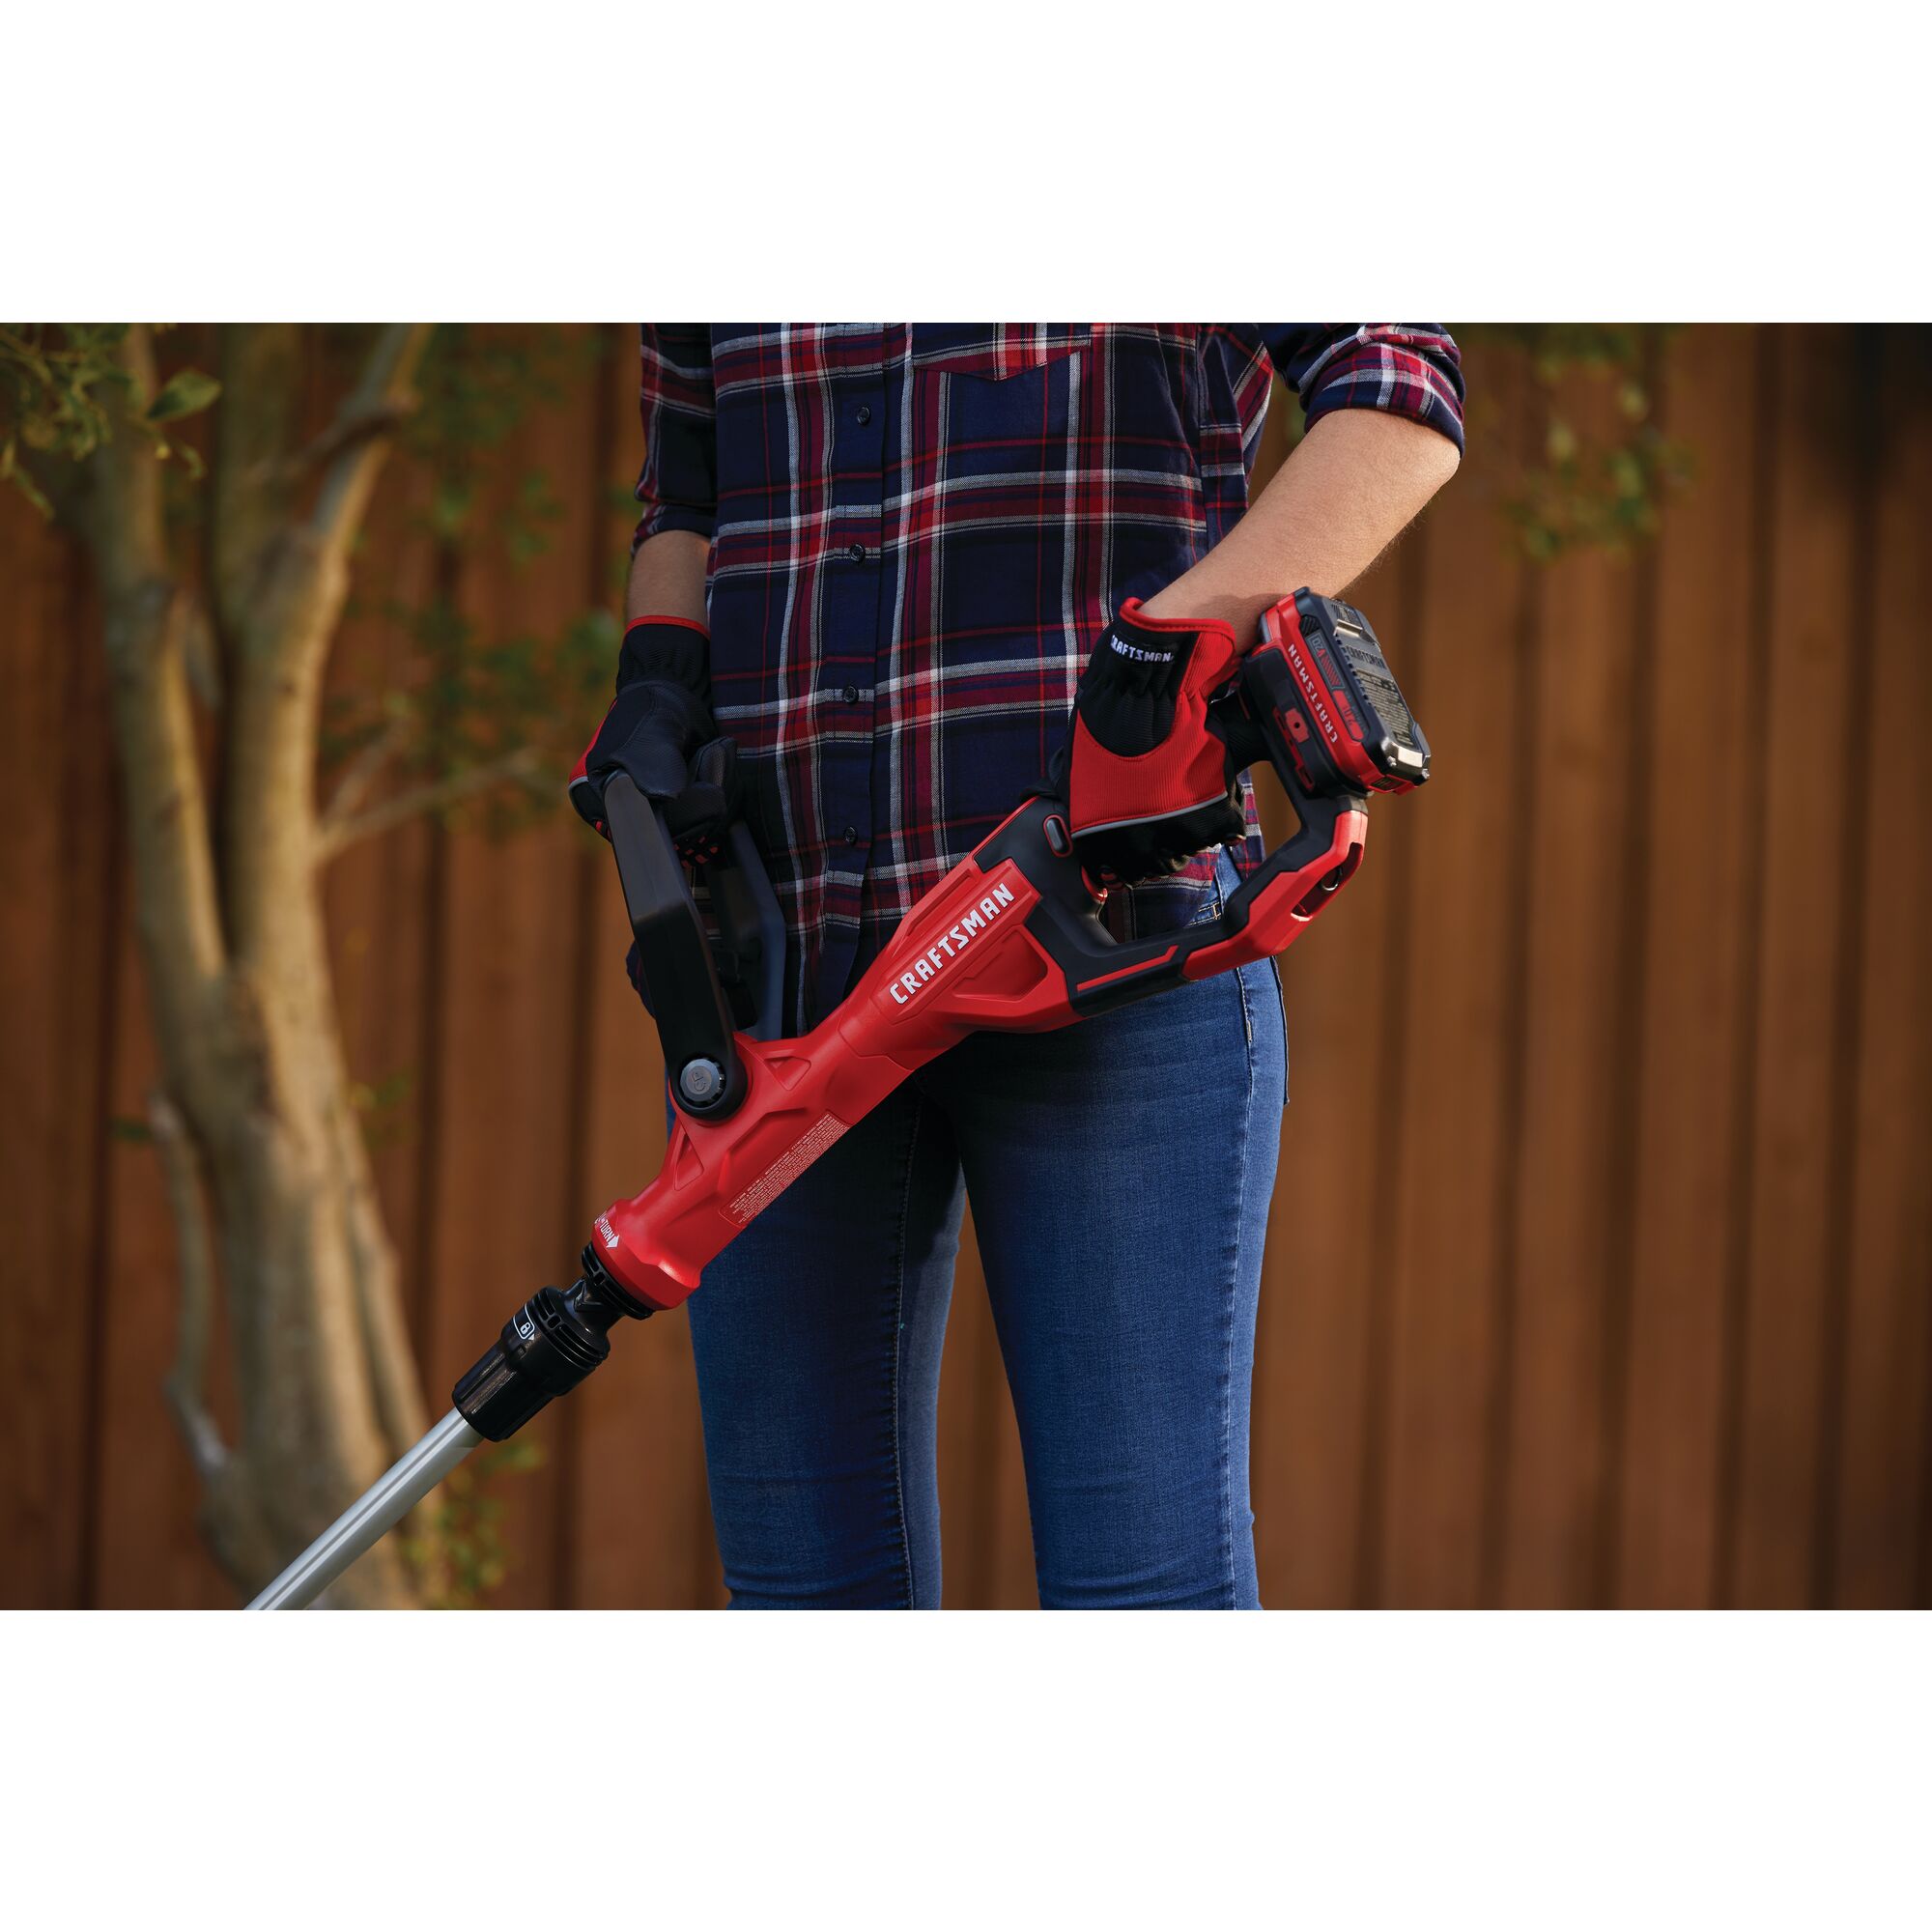 Easy to grip contoured over molded handle feature of 20 volt weedwacker 13 inch cordless string trimmer and edger with automatic feed kit.